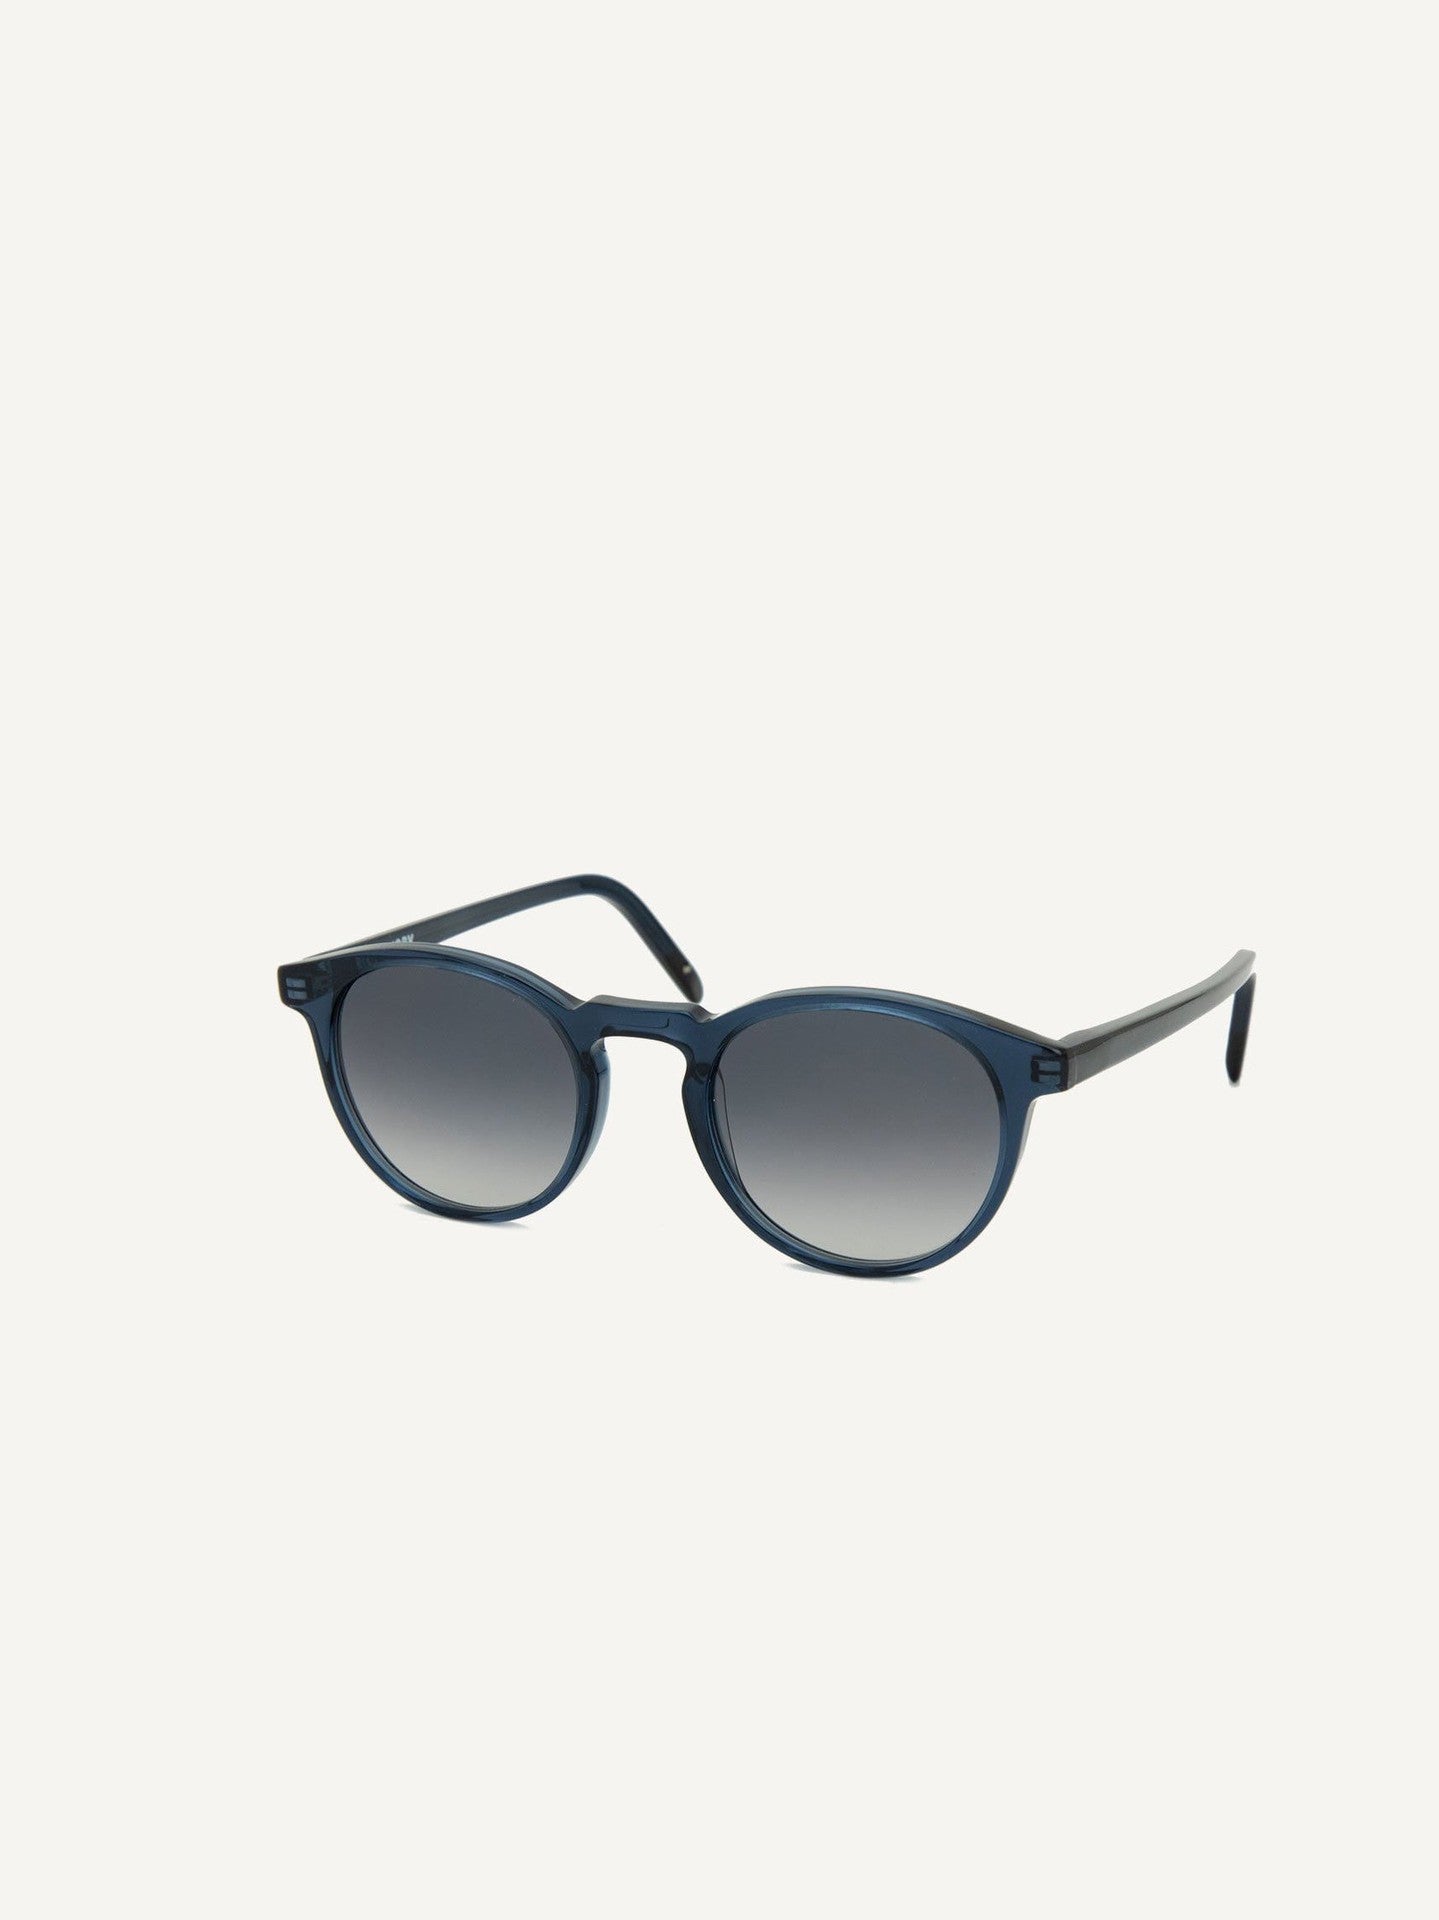 A pair of Seattle Sunglasses – Blue Lagoon by Dick Moby on a white background.